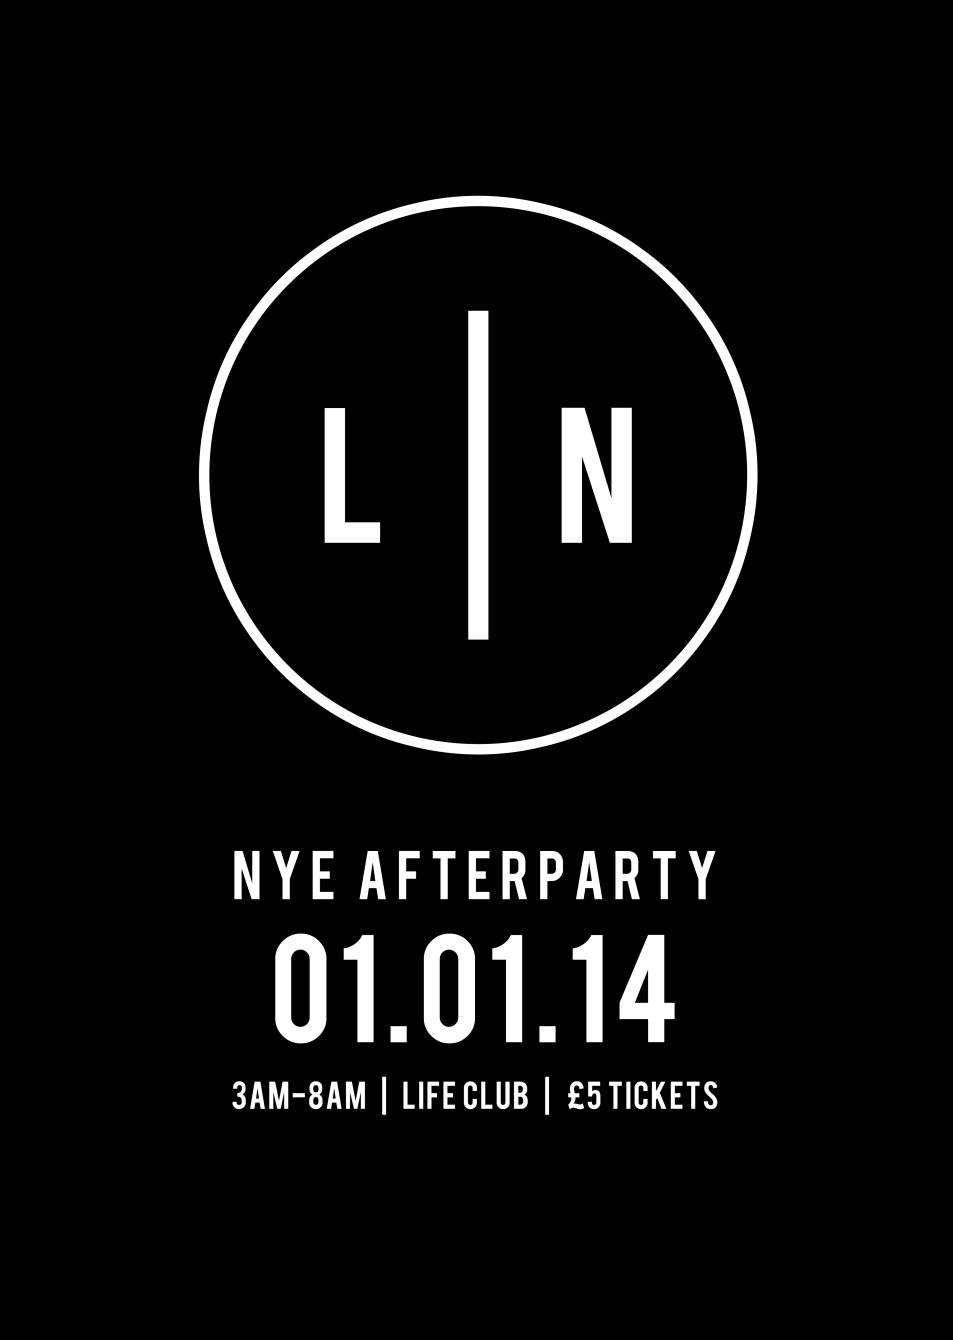 Late Night - NYE Afterparty - フライヤー裏